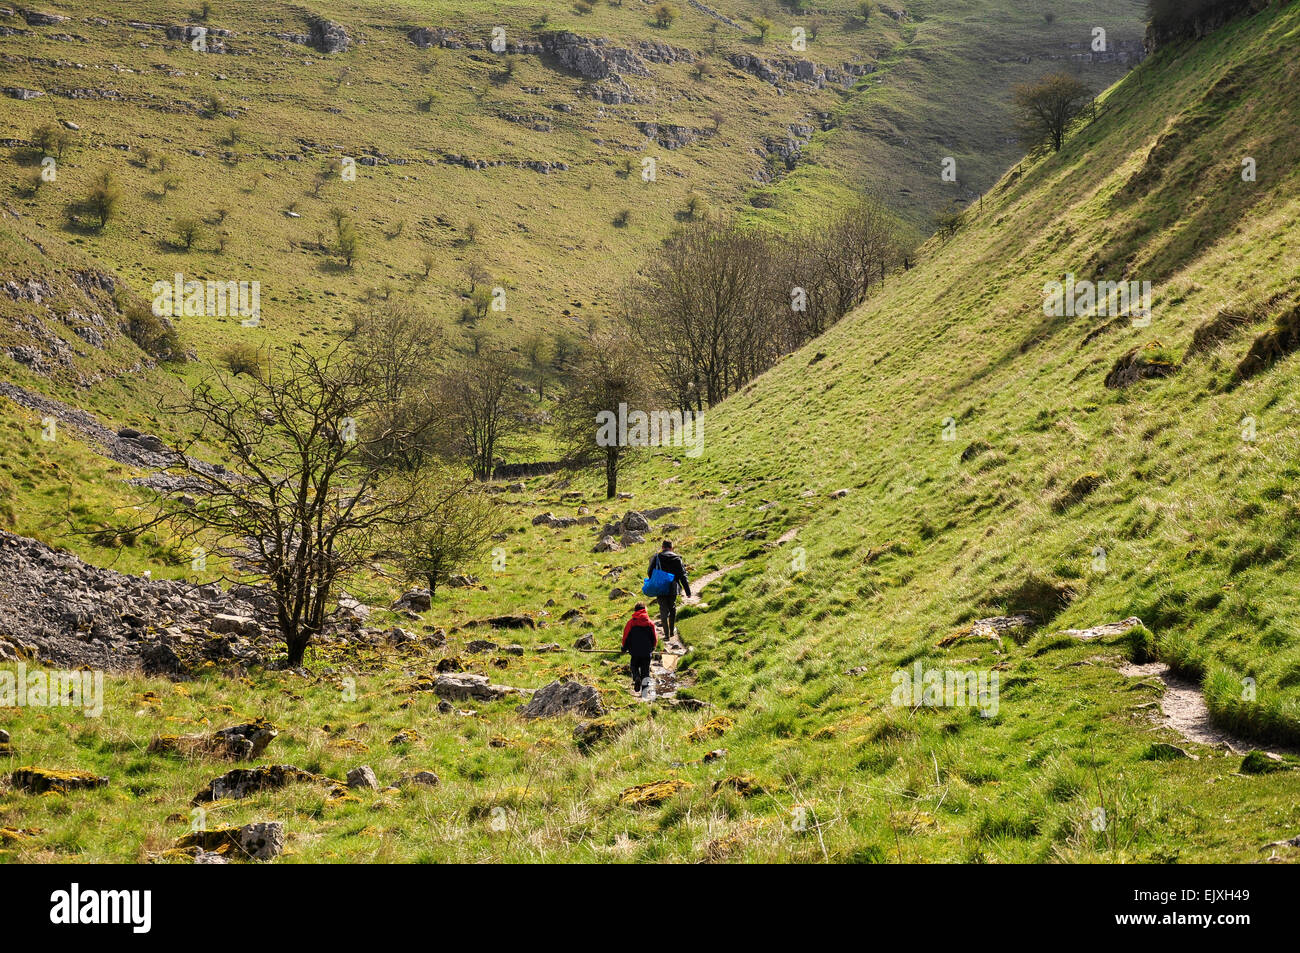 A father and son walking in Lathkill Dale near Monyash in the Peak District, Derbyshire. Stock Photo